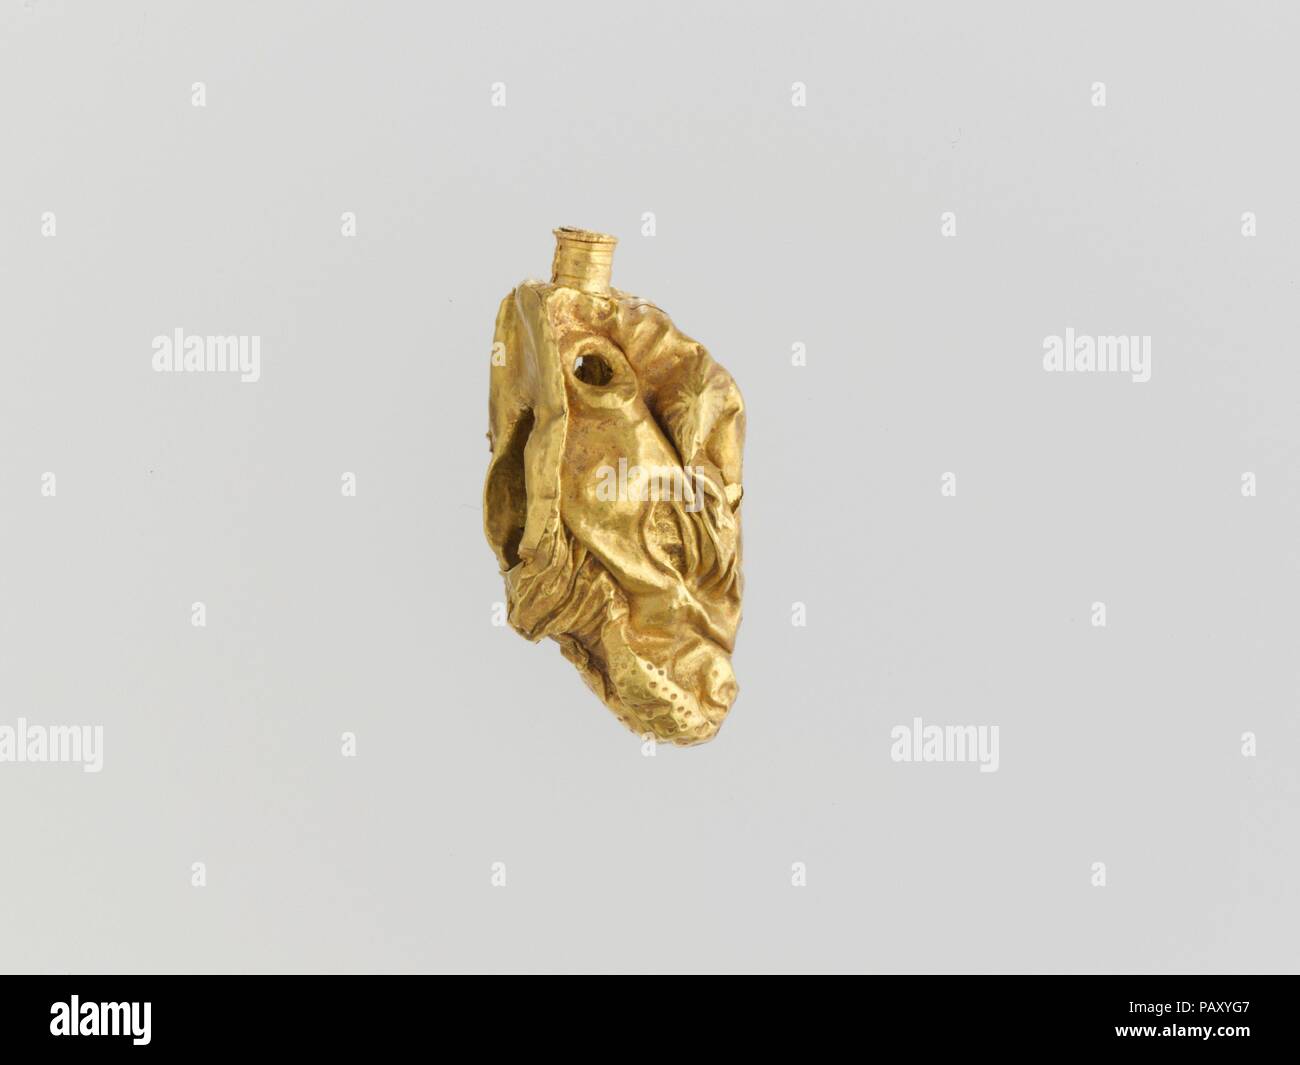 Gold pendant in the form of a bull's head. Culture: Cypriot. Dimensions: L. 13/16 in. (2.1 cm). Date: ca. 1400-1050 B.C..  Pendant in the form of a bull's head. Museum: Metropolitan Museum of Art, New York, USA. Stock Photo